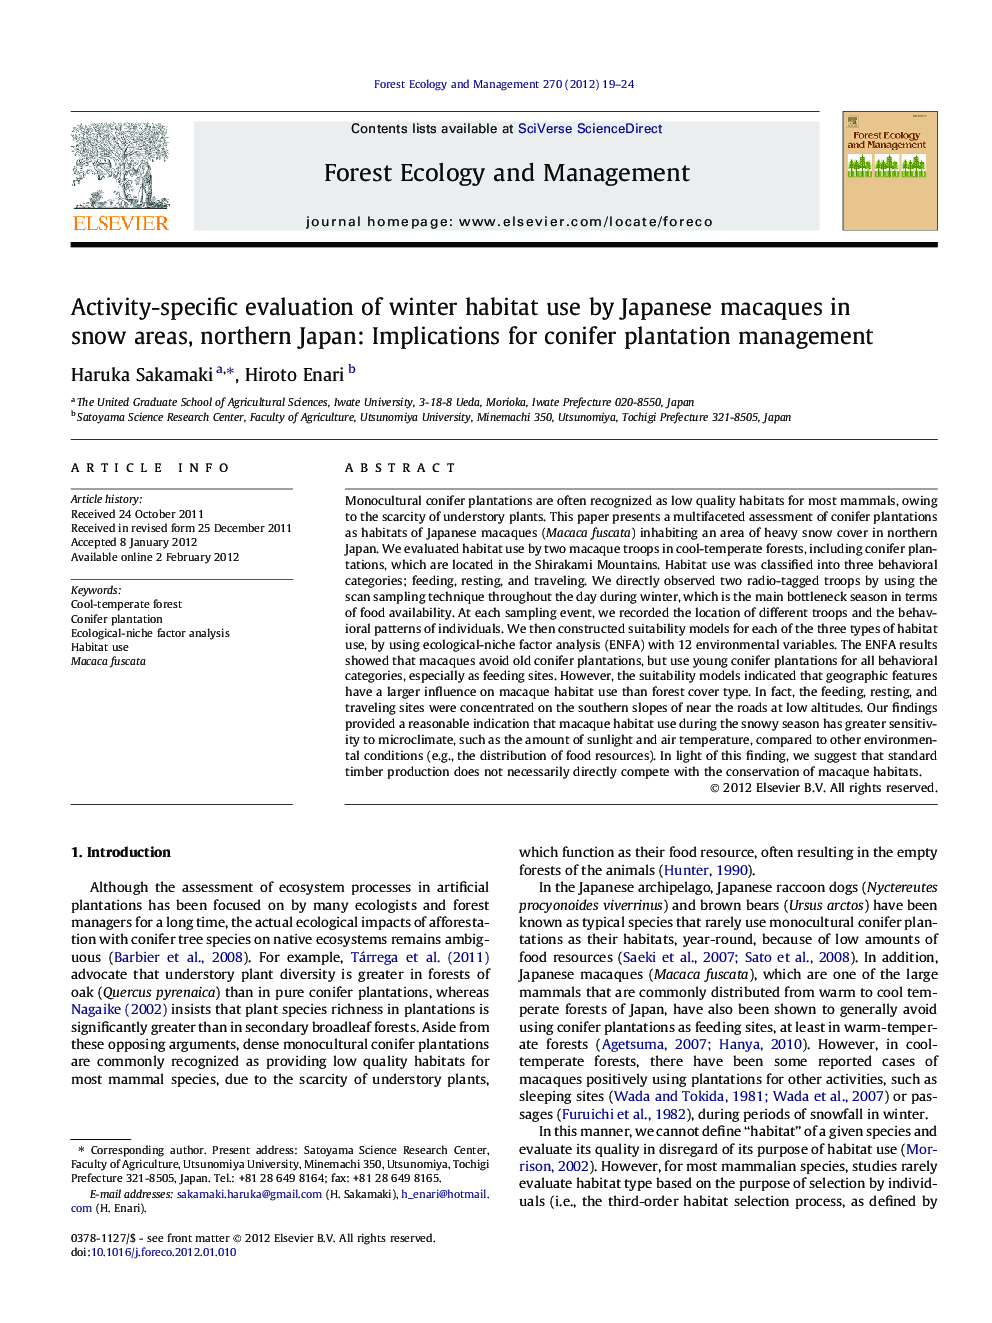 Activity-specific evaluation of winter habitat use by Japanese macaques in snow areas, northern Japan: Implications for conifer plantation management